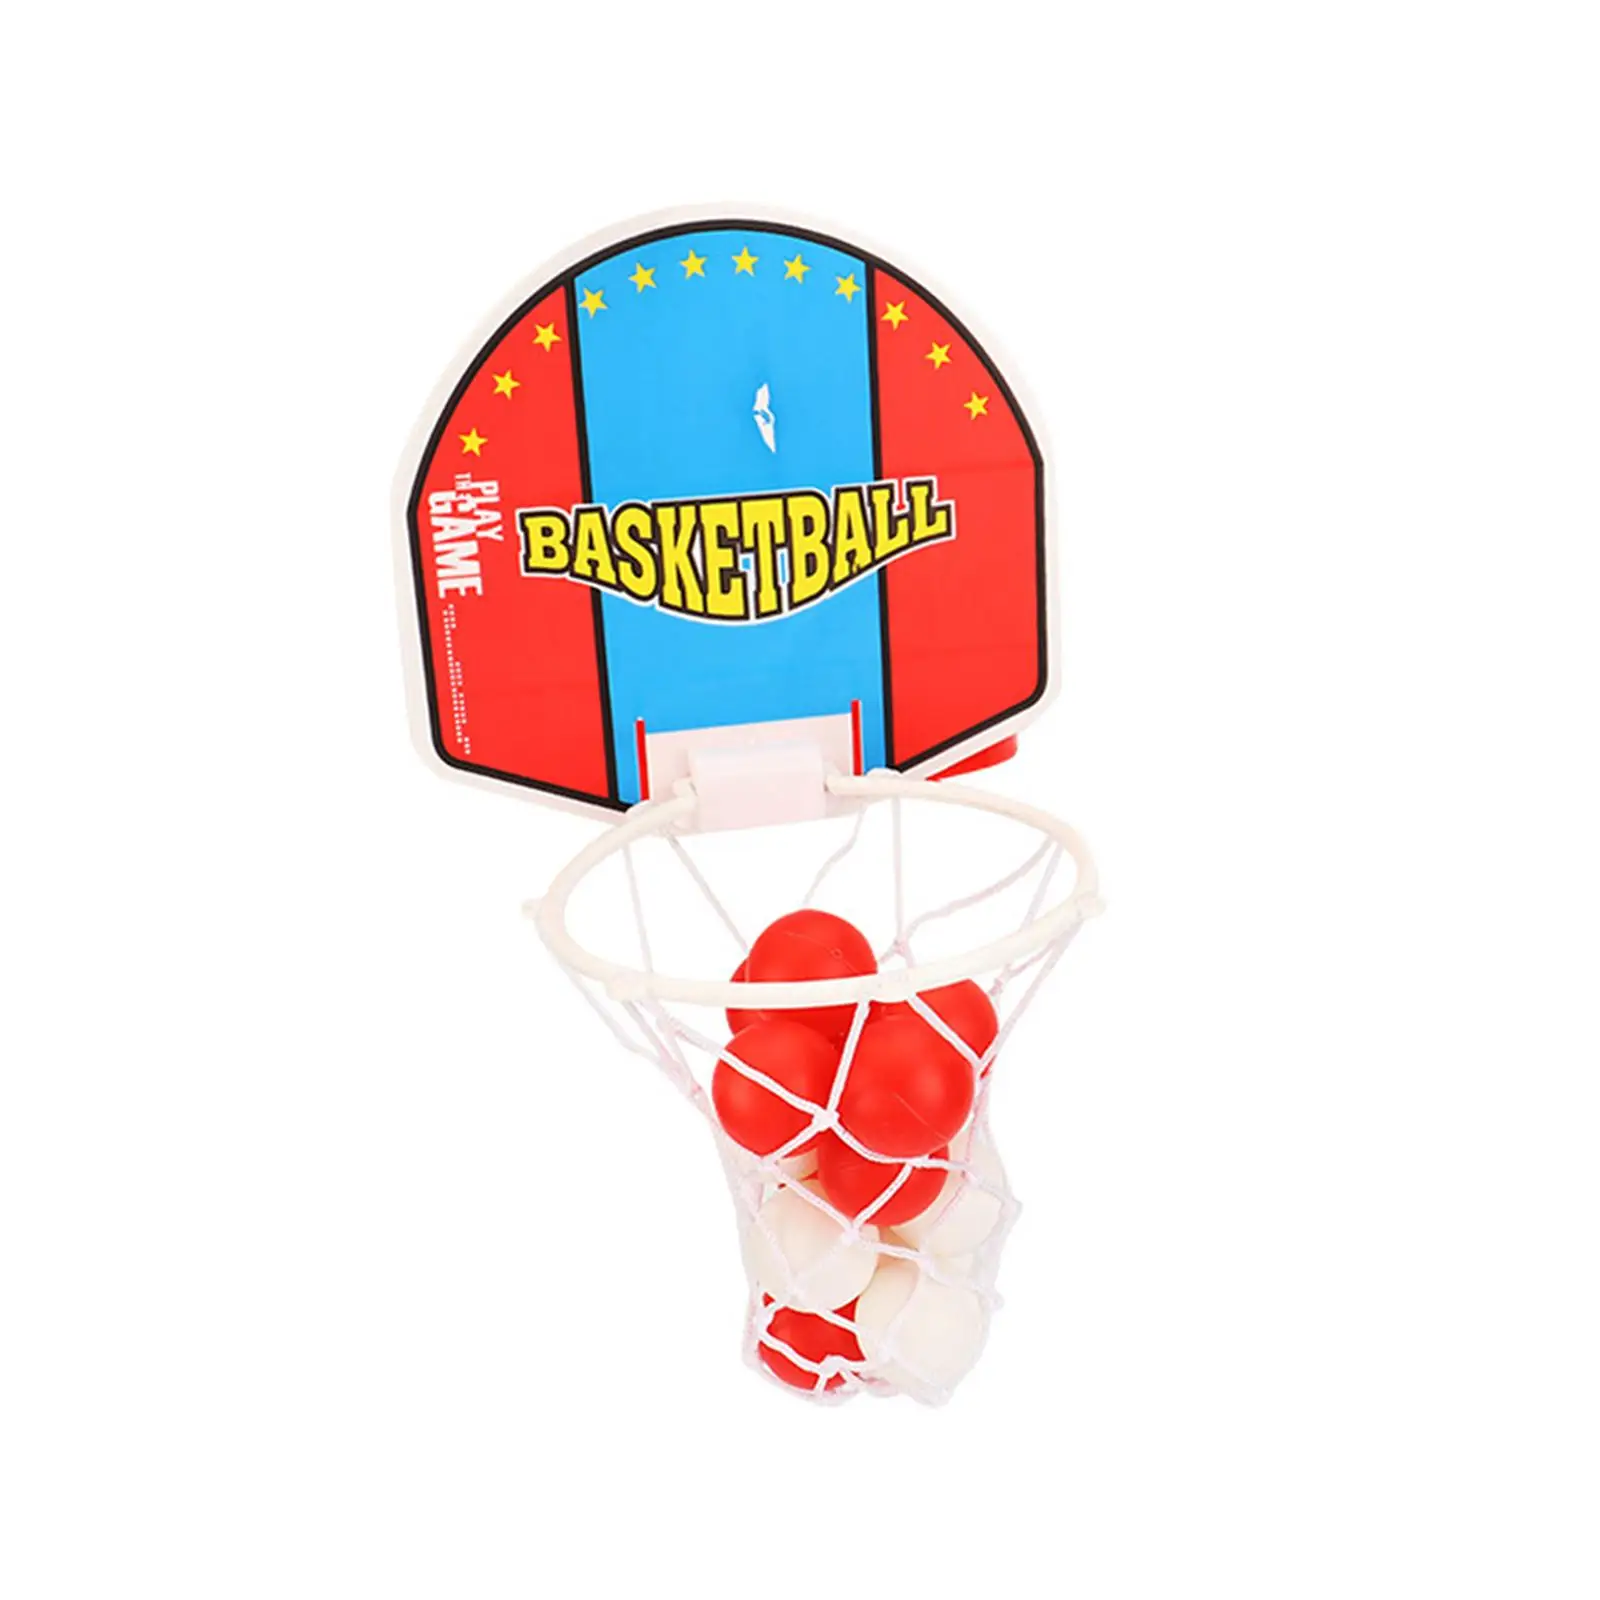 Head Hoop Basketball Interactive with Balls Carnival Ball Game Basketball Toss Game for Birthday Contest Party Gathering Holiday